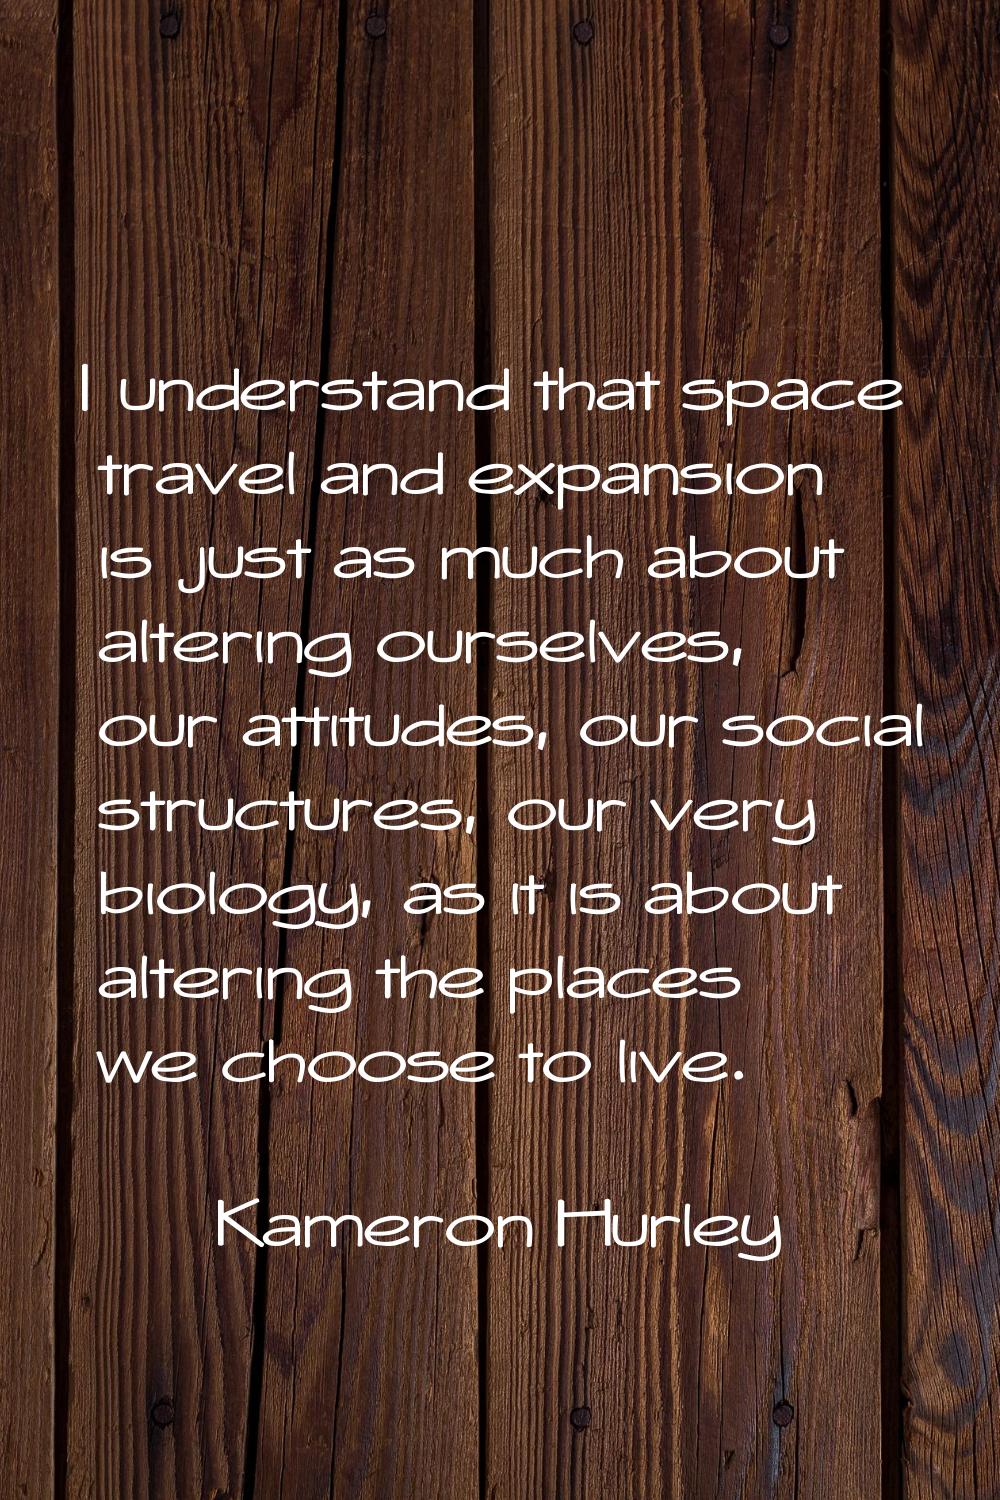 I understand that space travel and expansion is just as much about altering ourselves, our attitude